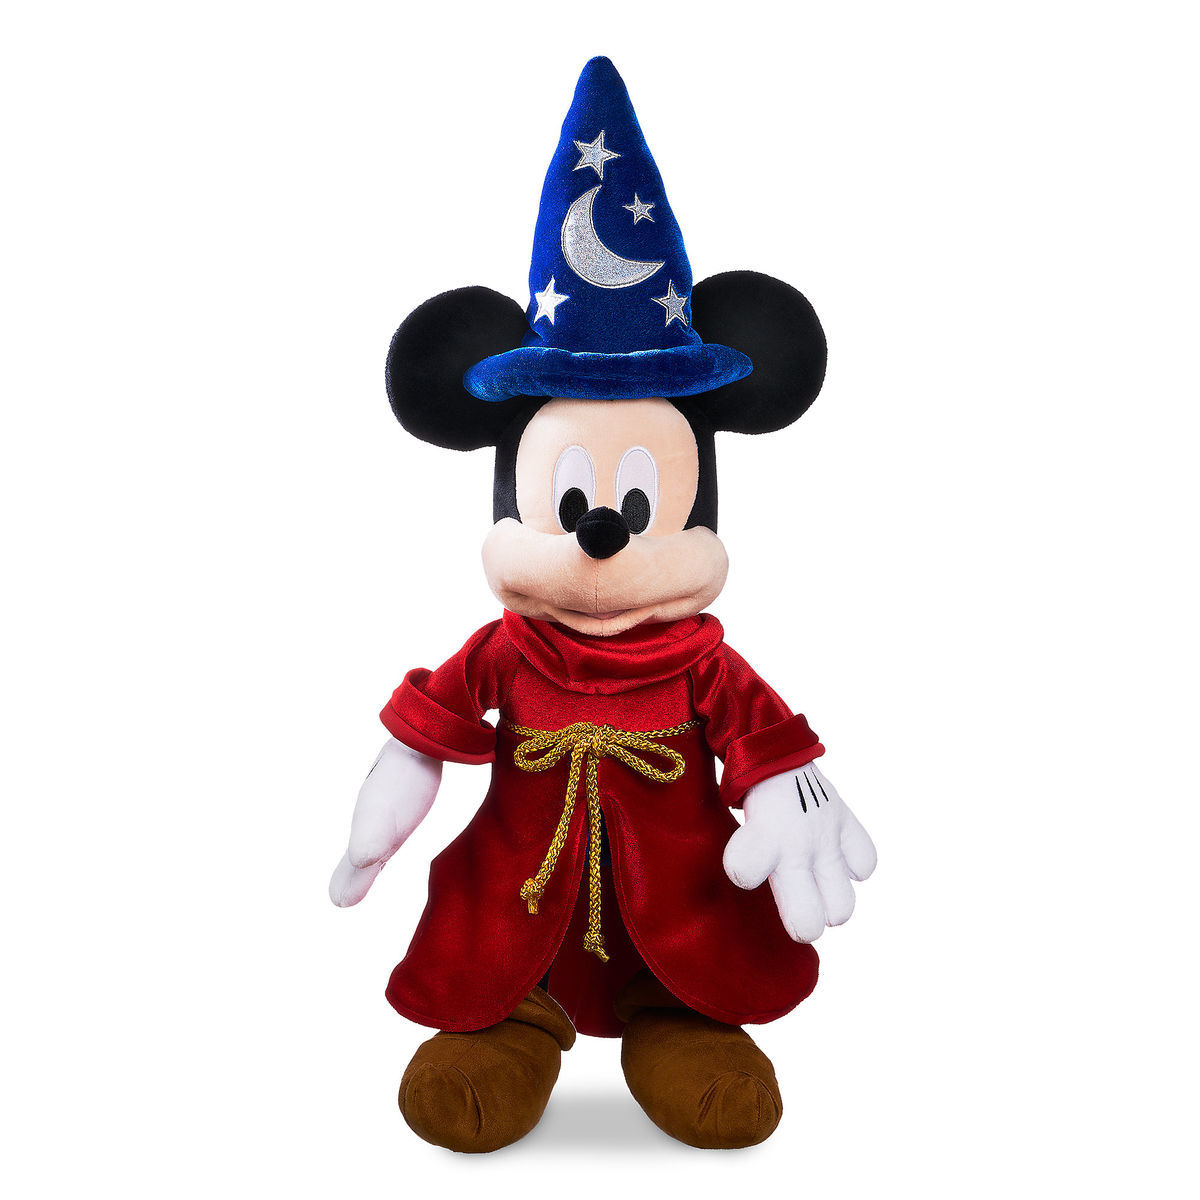 Disney Sorcerer Mickey Mouse Medium Plush New with Tags